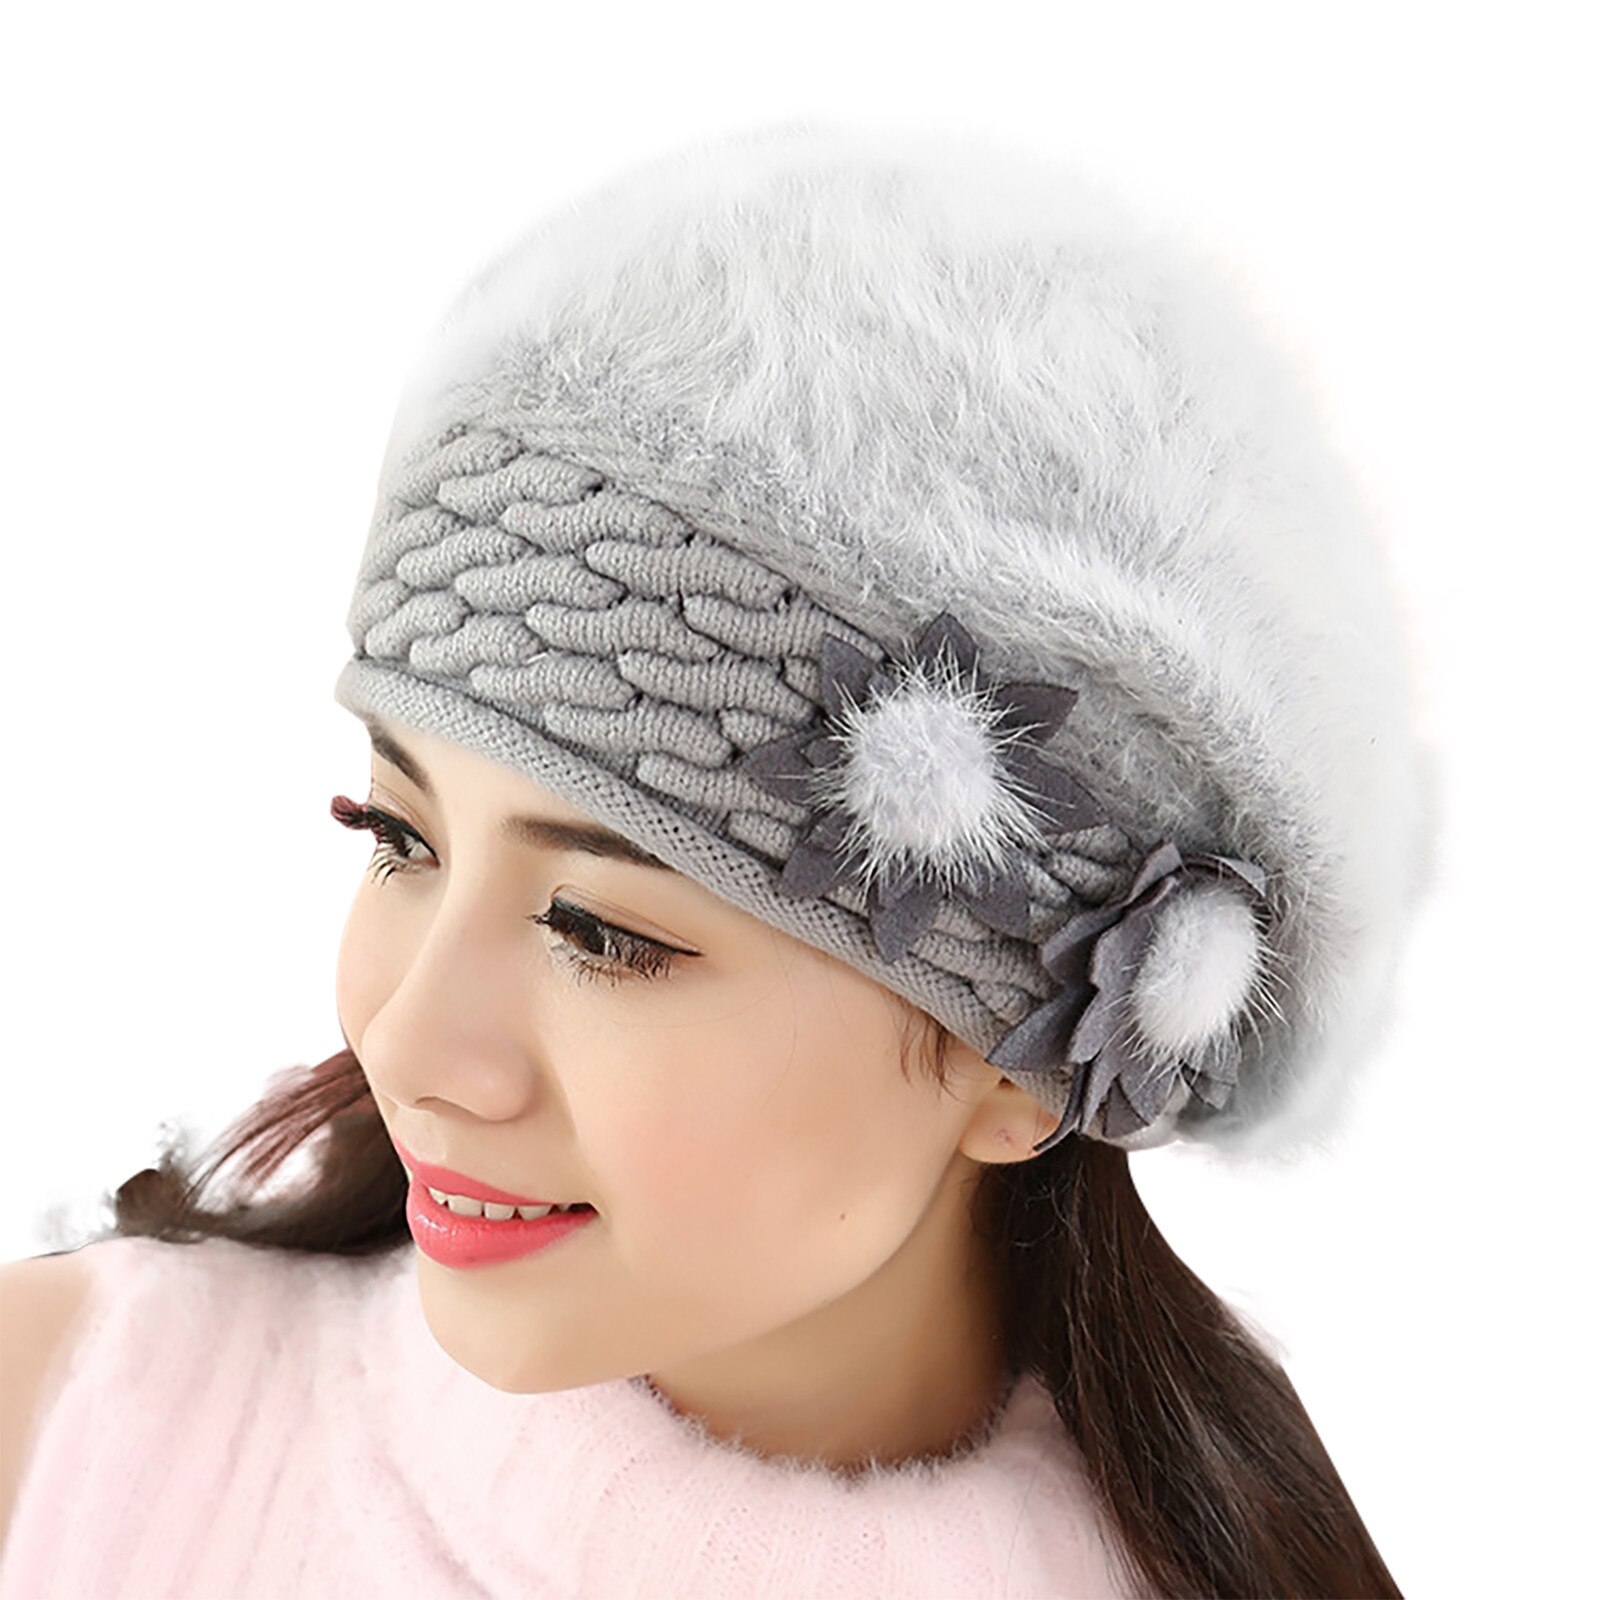 Beret Women Winter Hat Beanie Warm Knit Flower Double Layers Soft Thick Thermal Snow Skiing Outdoor Hats For Female Caps: Gray 